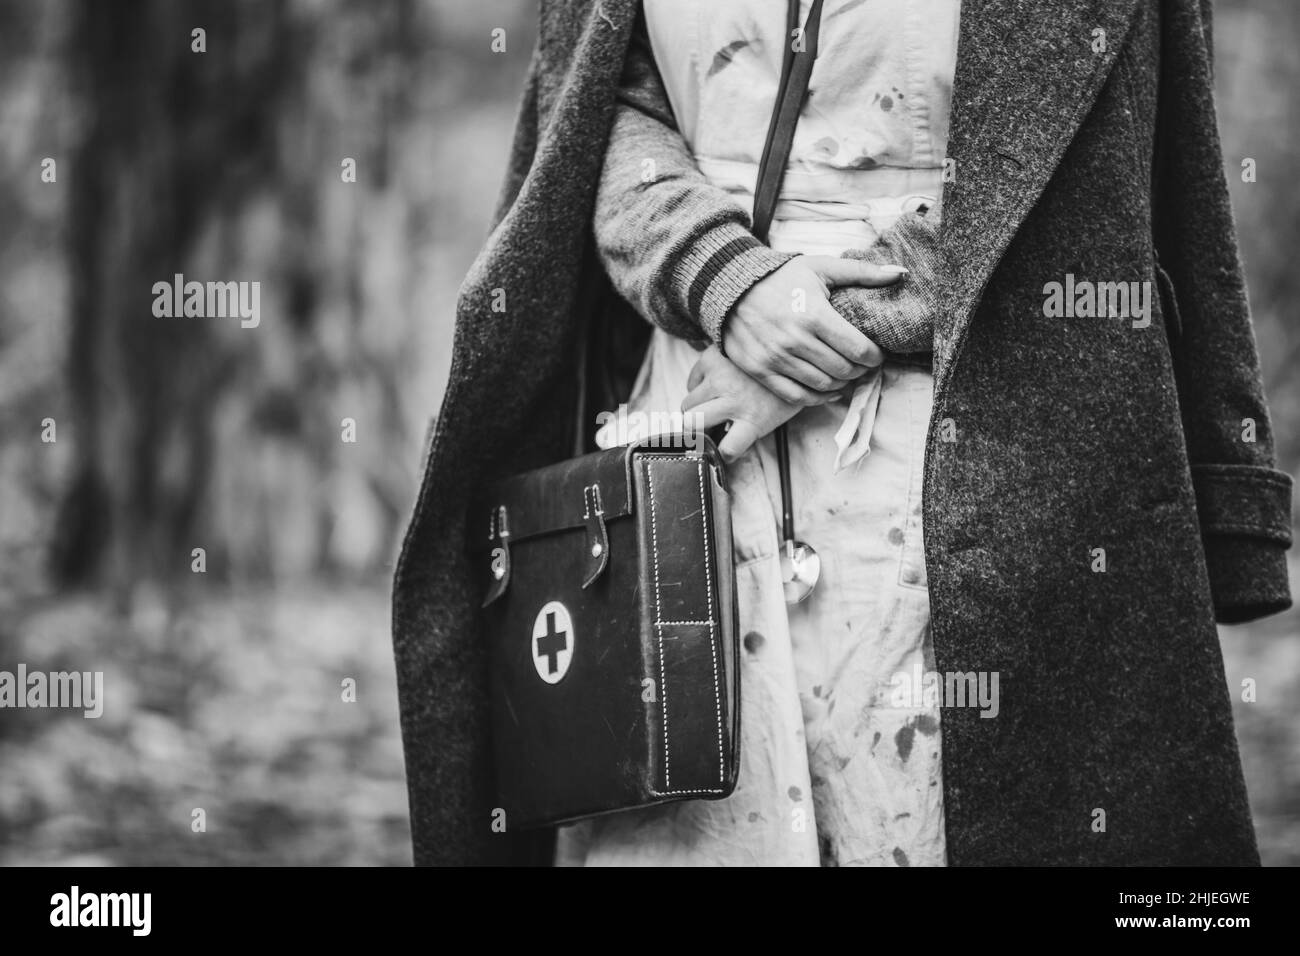 Re-enactor Wears Historical German Nurse Paramedic Of World War II Uniform With First Aid Kit. Photo In Black And White Colors. WWII WW2 Stock Photo